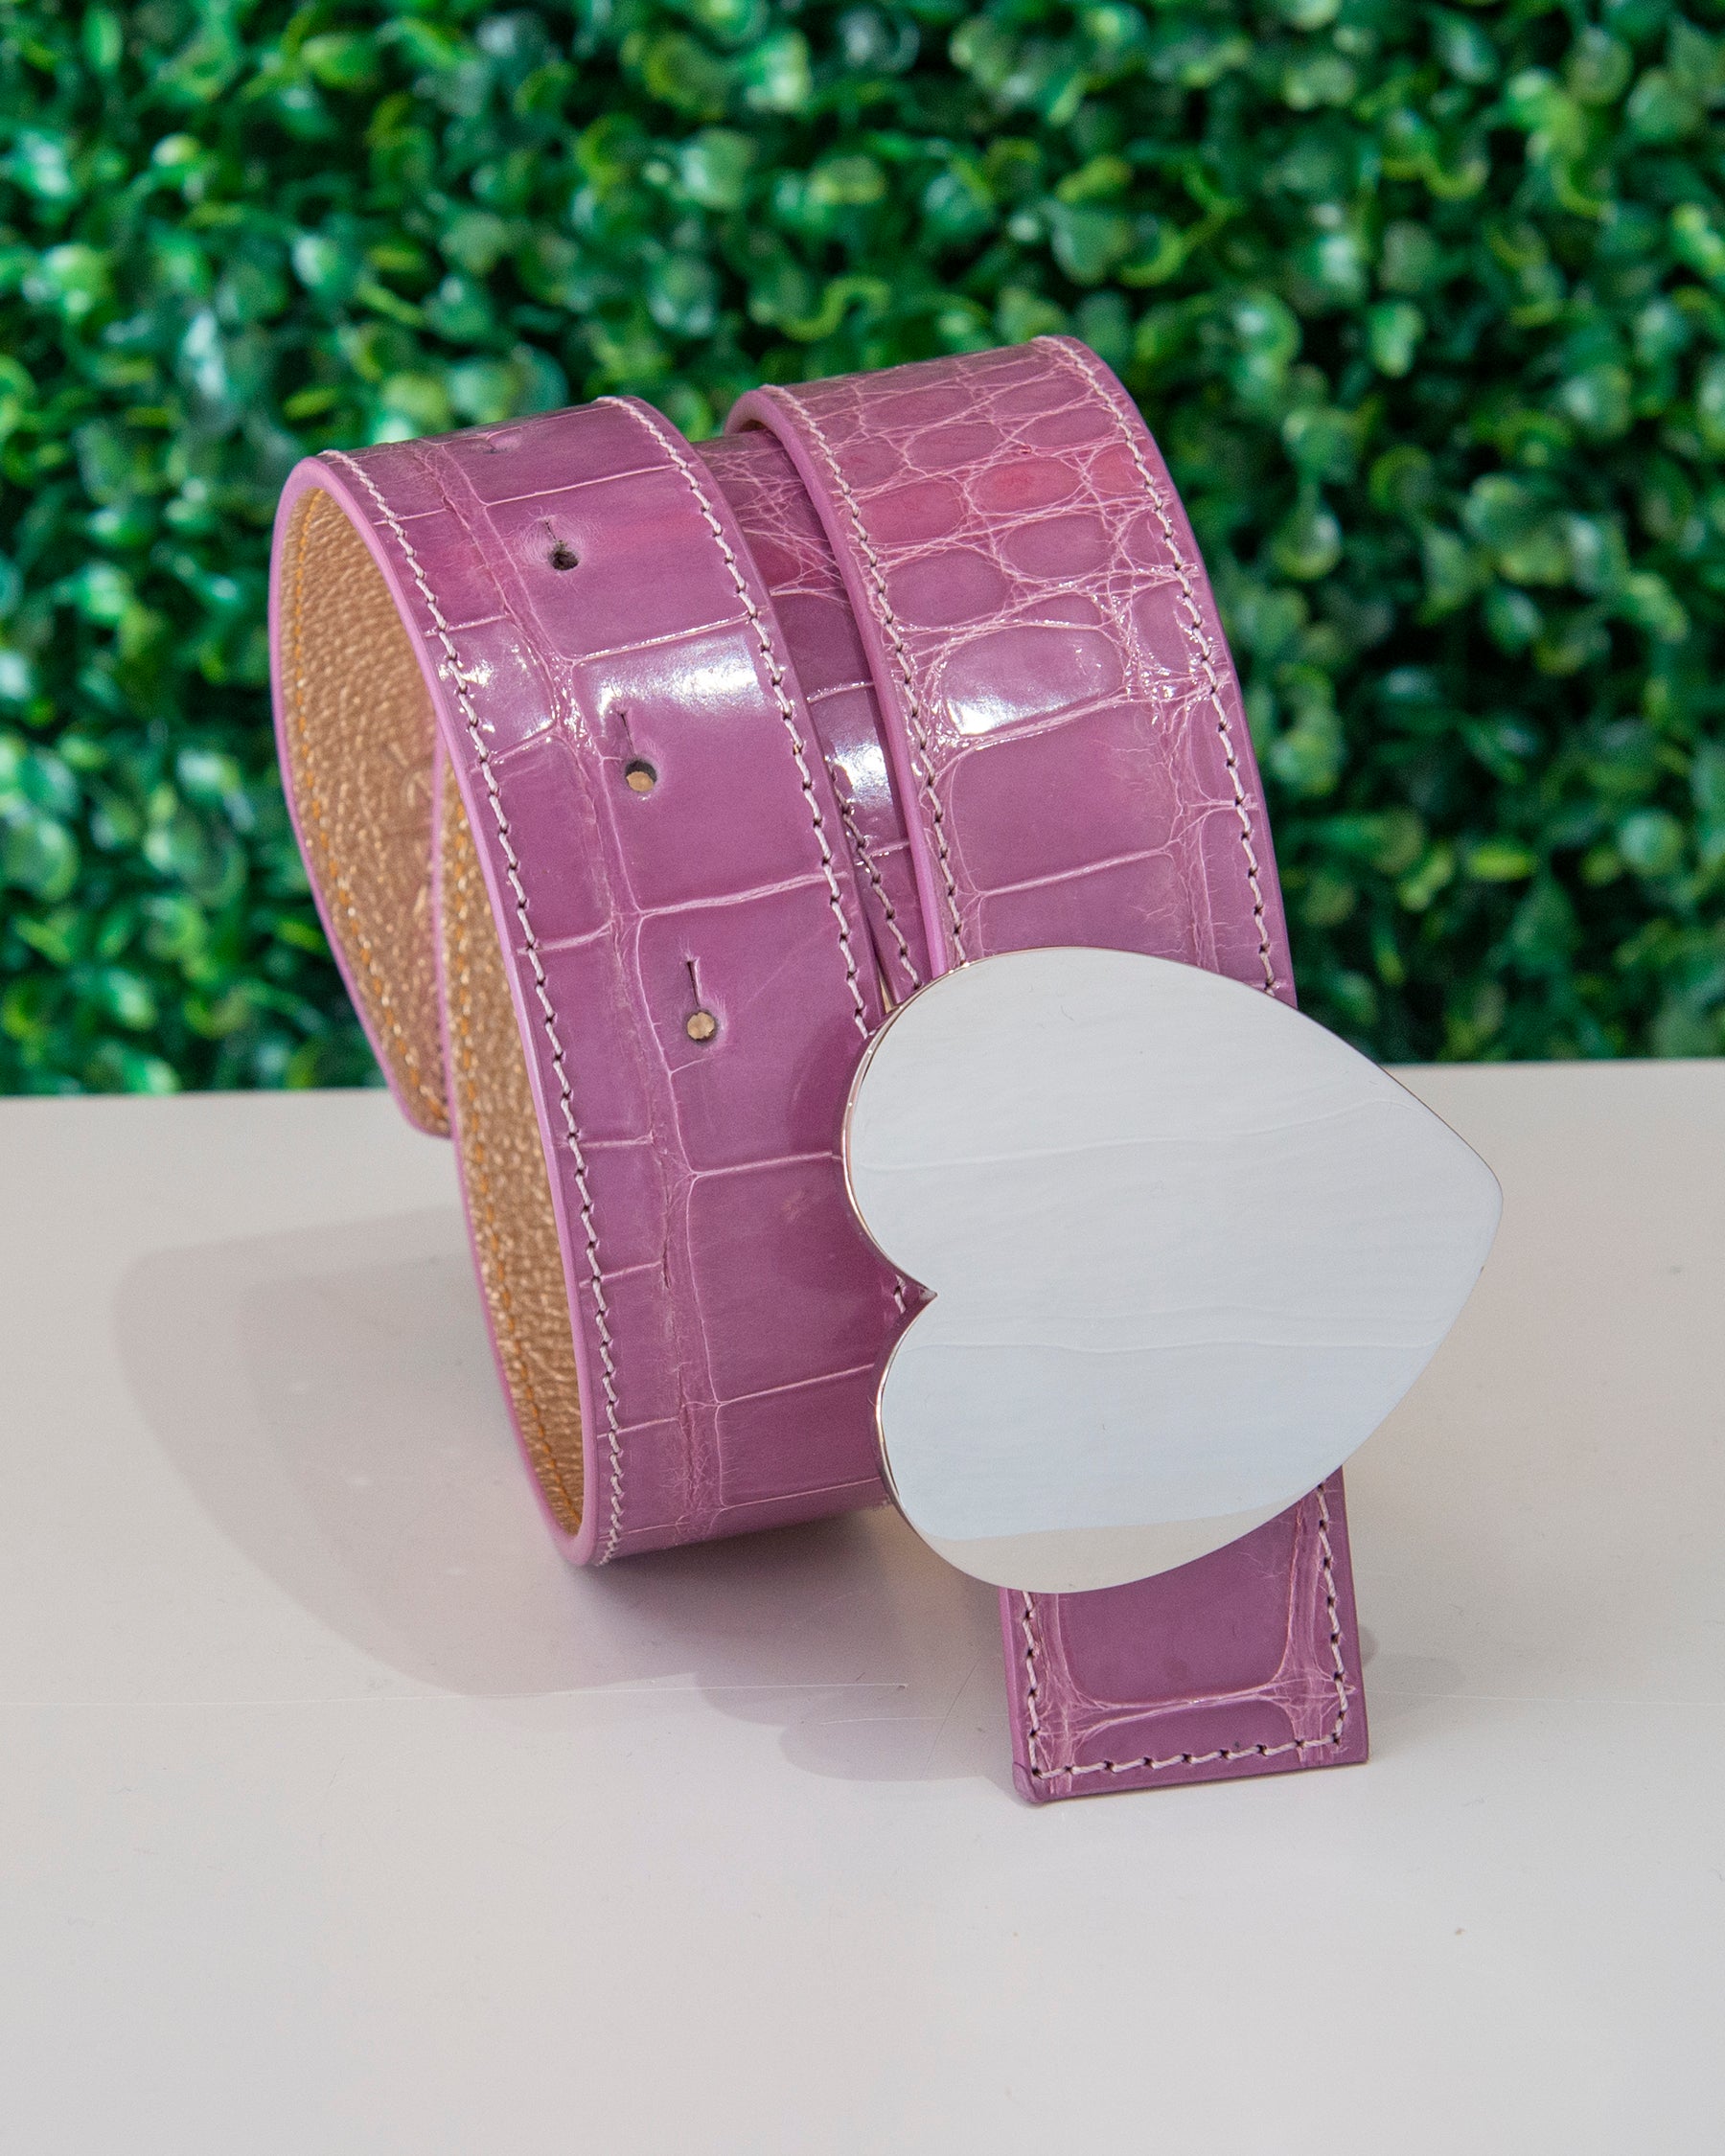 The Pink Pineapple Tallahassee GG Buckle Belt